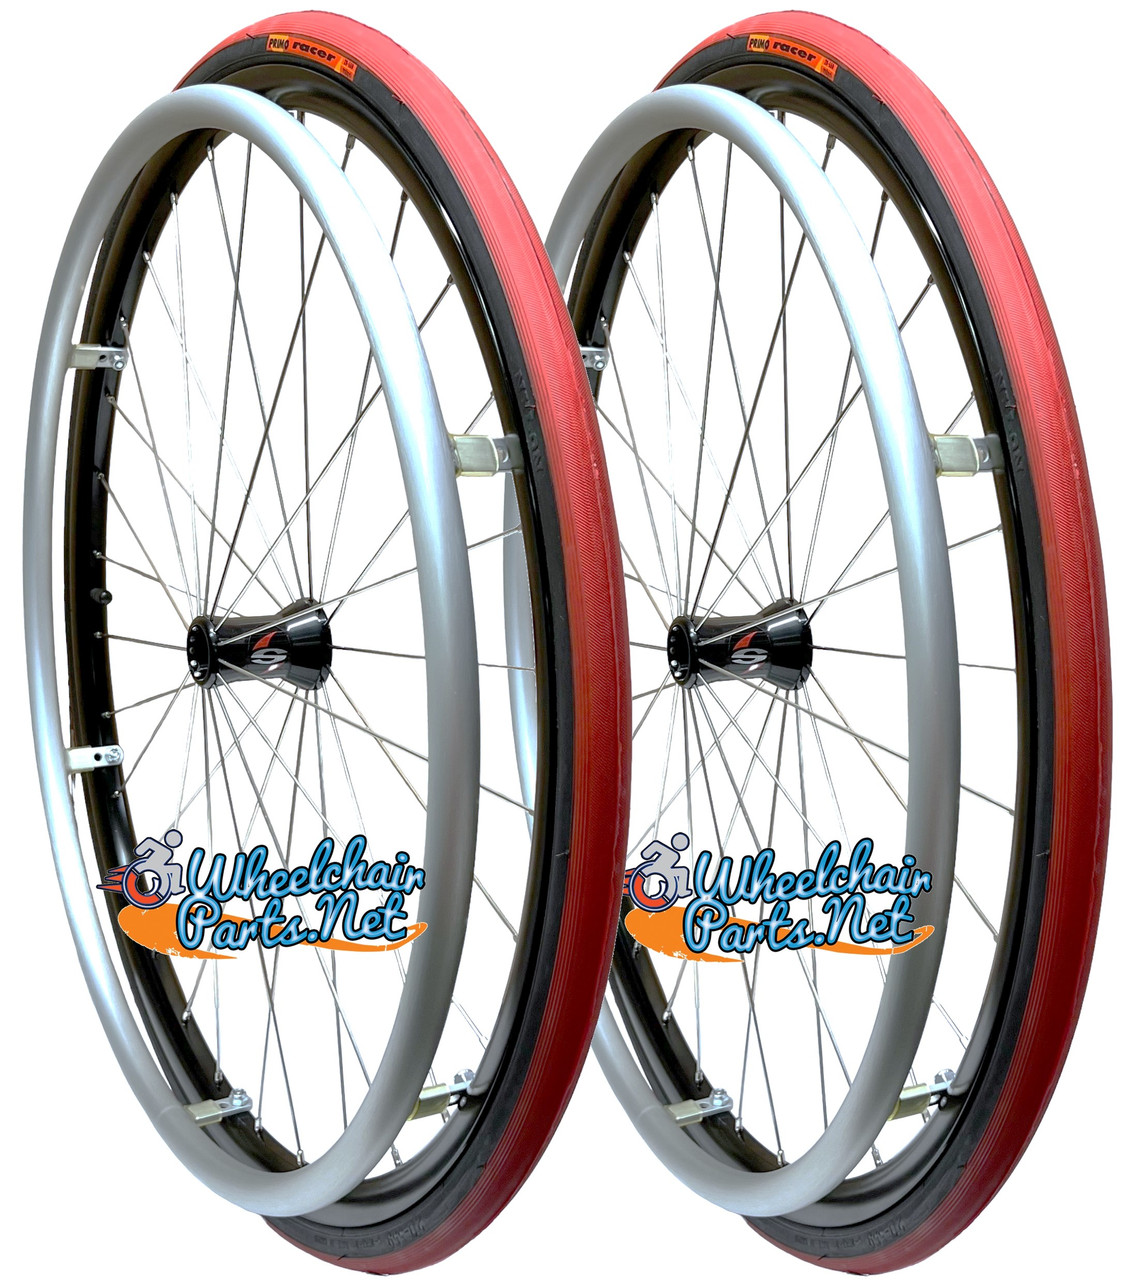 25" x 1" Spinergy 30 Spoke Rear Wheel With Primo PNEUMATIC Racer Tire (Red Color)